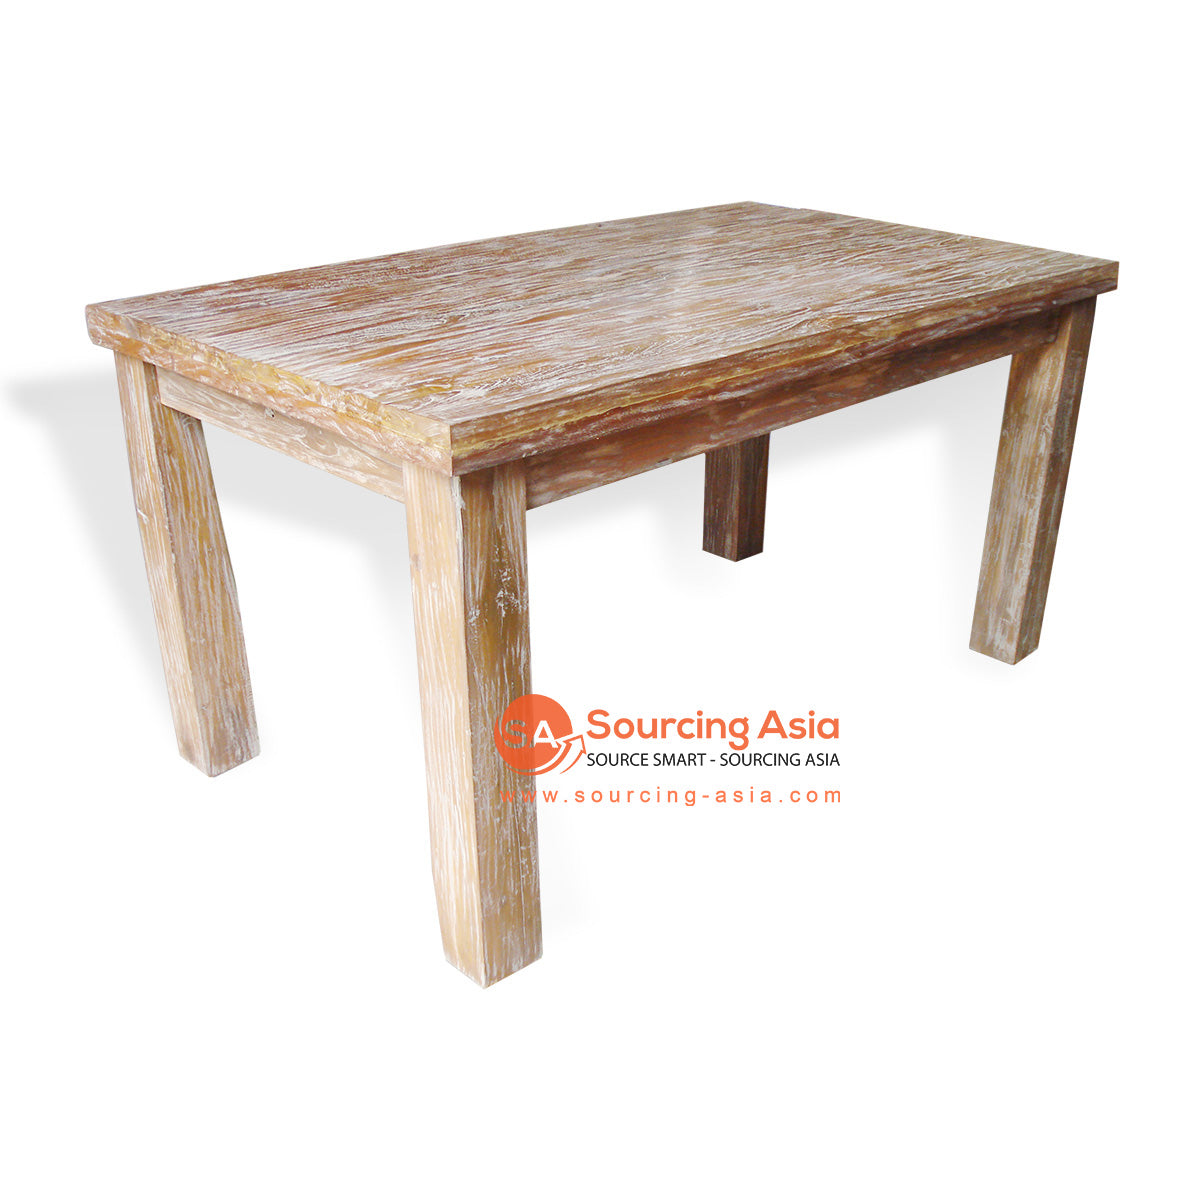 TRG-DTR6 MUD FINISH RECYCLED TEAK WOOD SIMPLE RUSTIC DINING TABLE